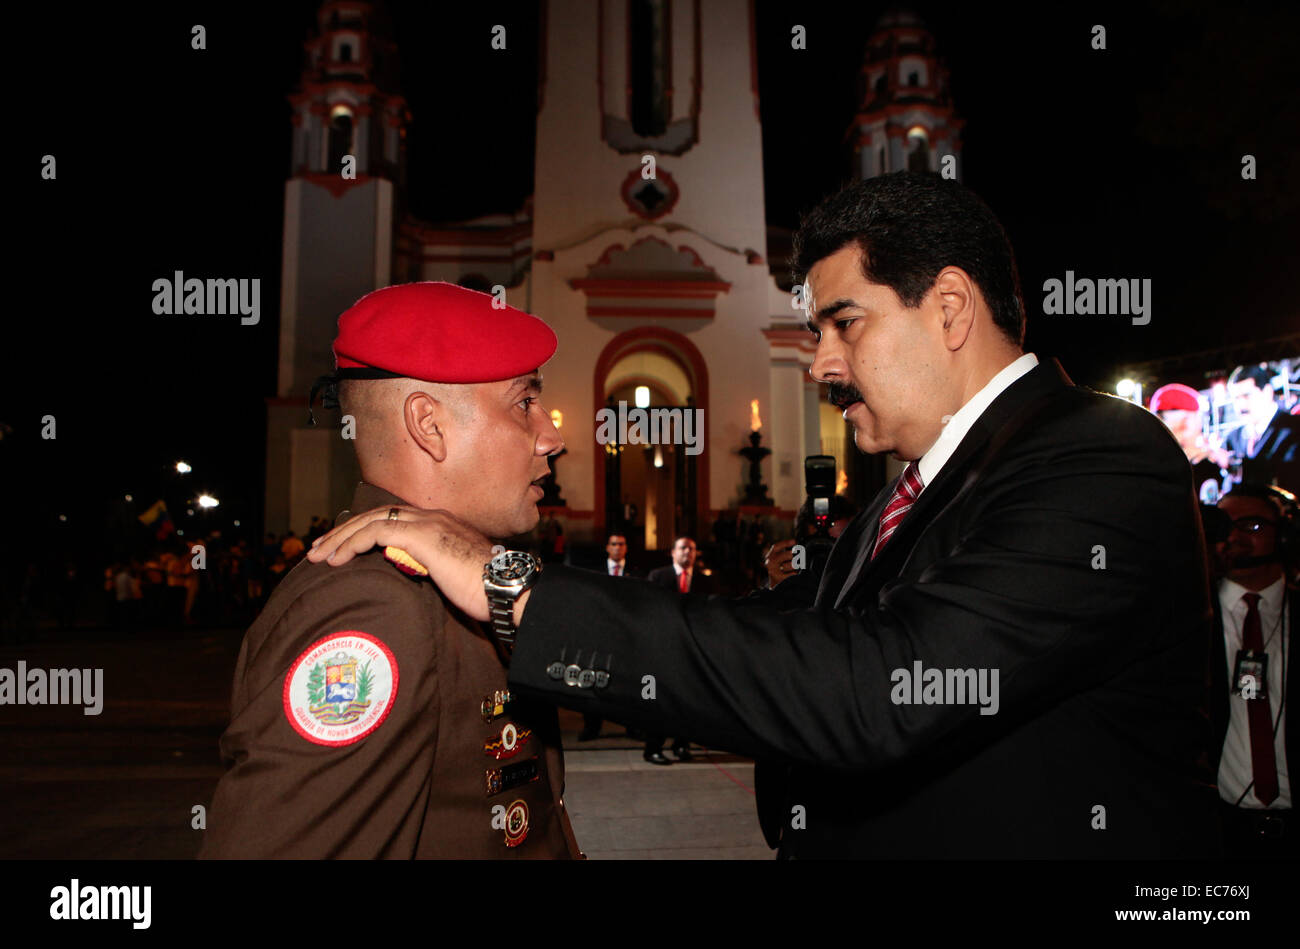 Caracas, Venezuela. 9th Dec, 2014. Image provided by Venezuela's Presidency shows Venezuelan President Nicolas Maduro (R) talking with a soldier during a ceremony marking the 190th anniversary of the Battle of Ayacucho, at the National Pantheon in Caracas, Venezuela, on Dec. 9, 2014. © Venezuela's Presidency/Xinhua/Alamy Live News Stock Photo